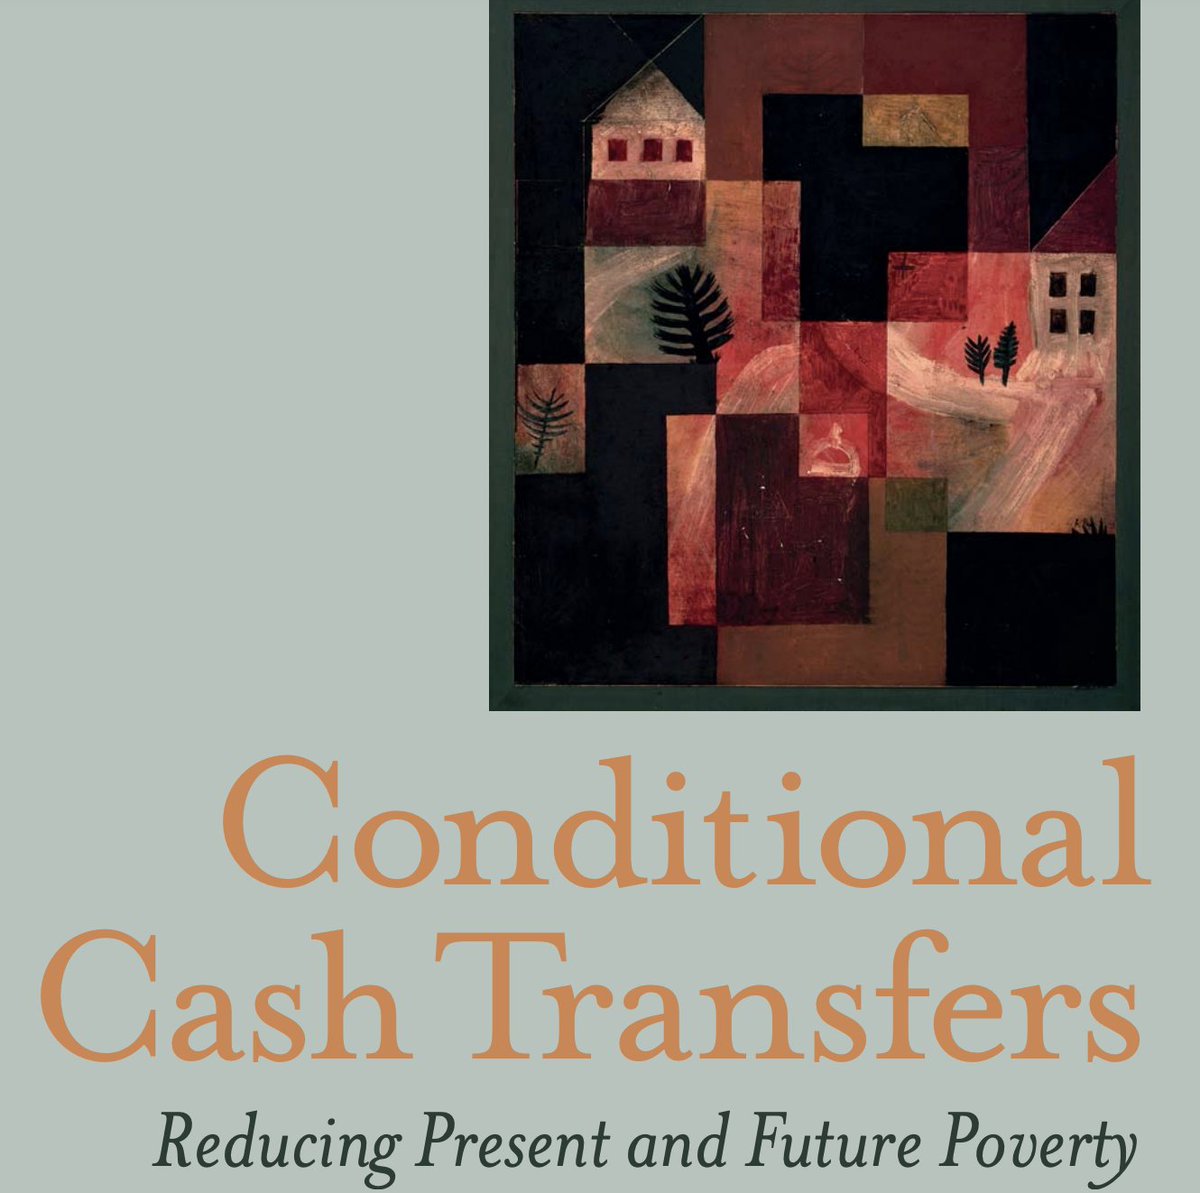 Conditional cash transfers have been proven to be an effective way to increase coverage for low-income populations in other health areas. However, the studies reviewed did not assess outcomes by socio-economic status. This was a missed opportunity.